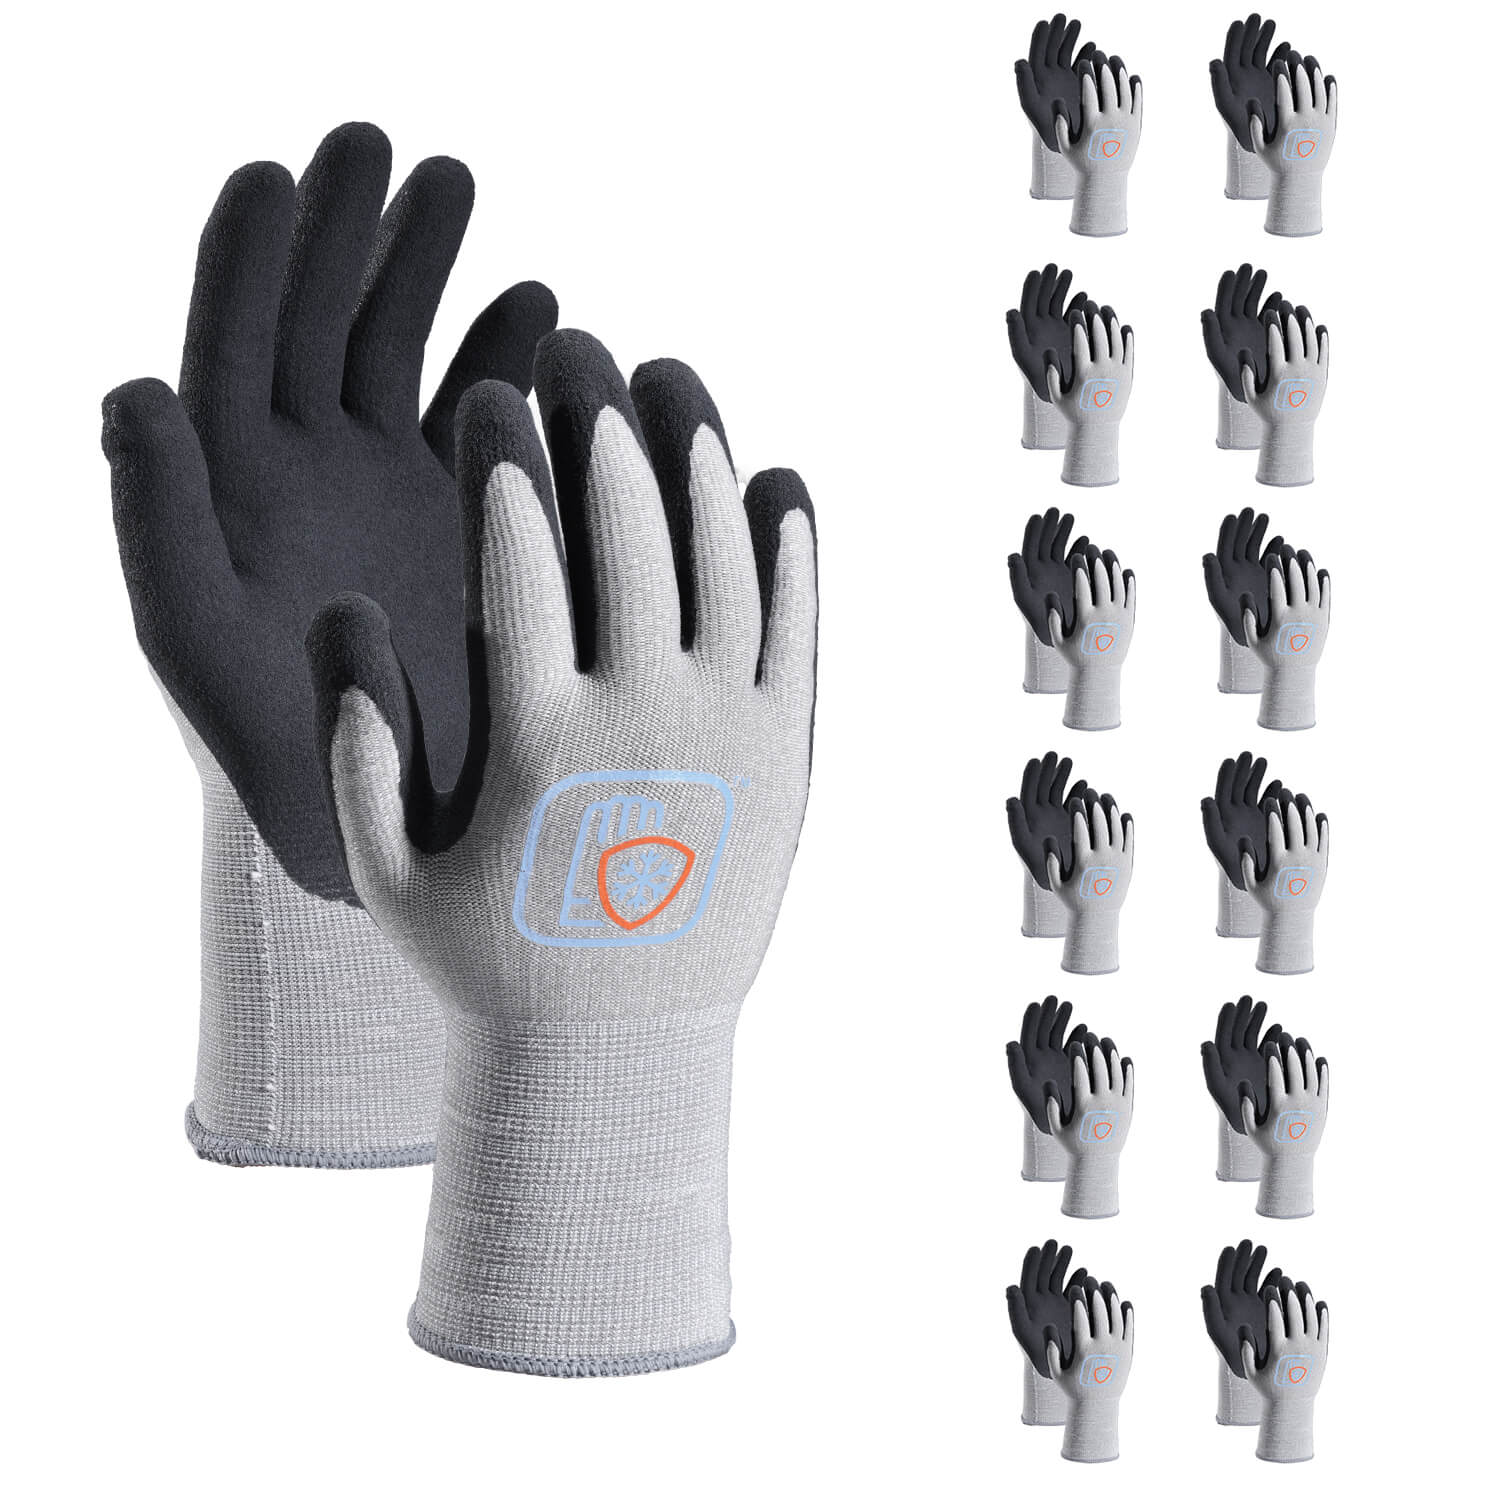 SAFEYEAR 12 Pairs Safety Gloves Work Gloves With Natural Latex For Gardening Building